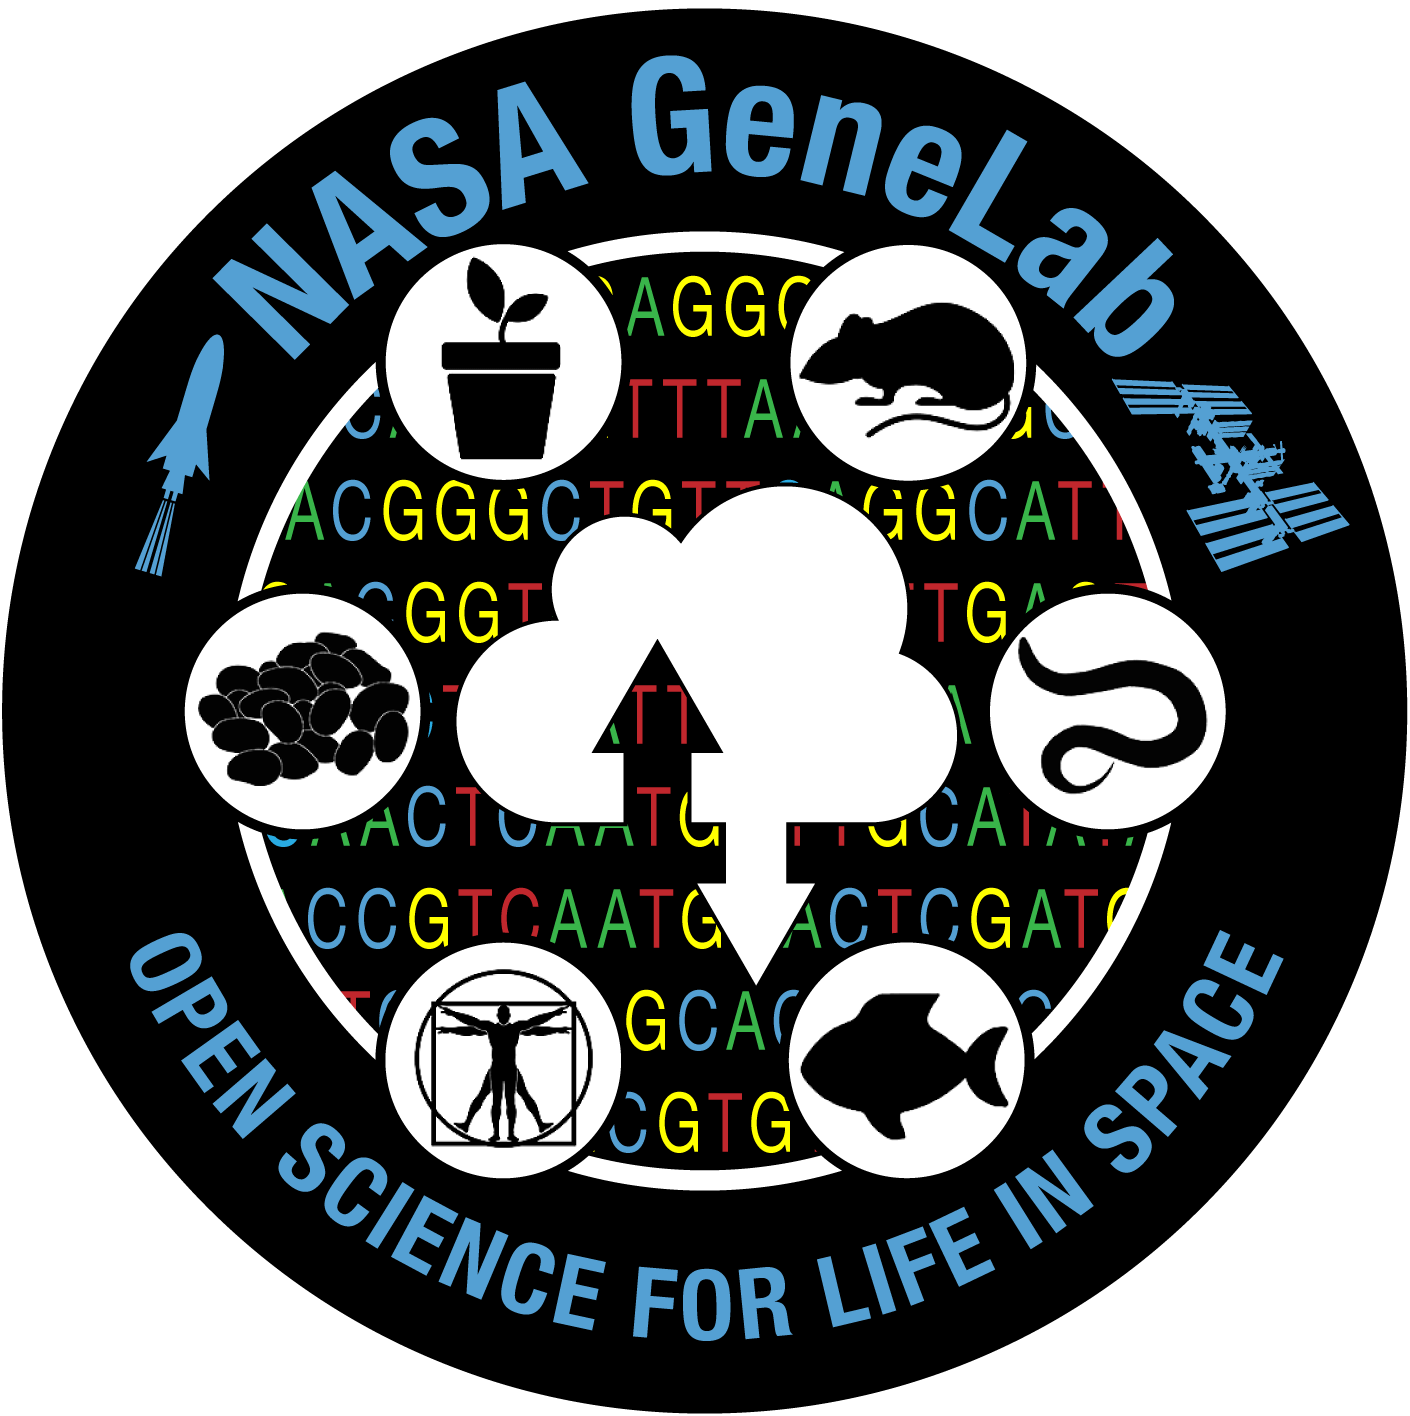 NASA GeneLab – Open Science for Life in Space